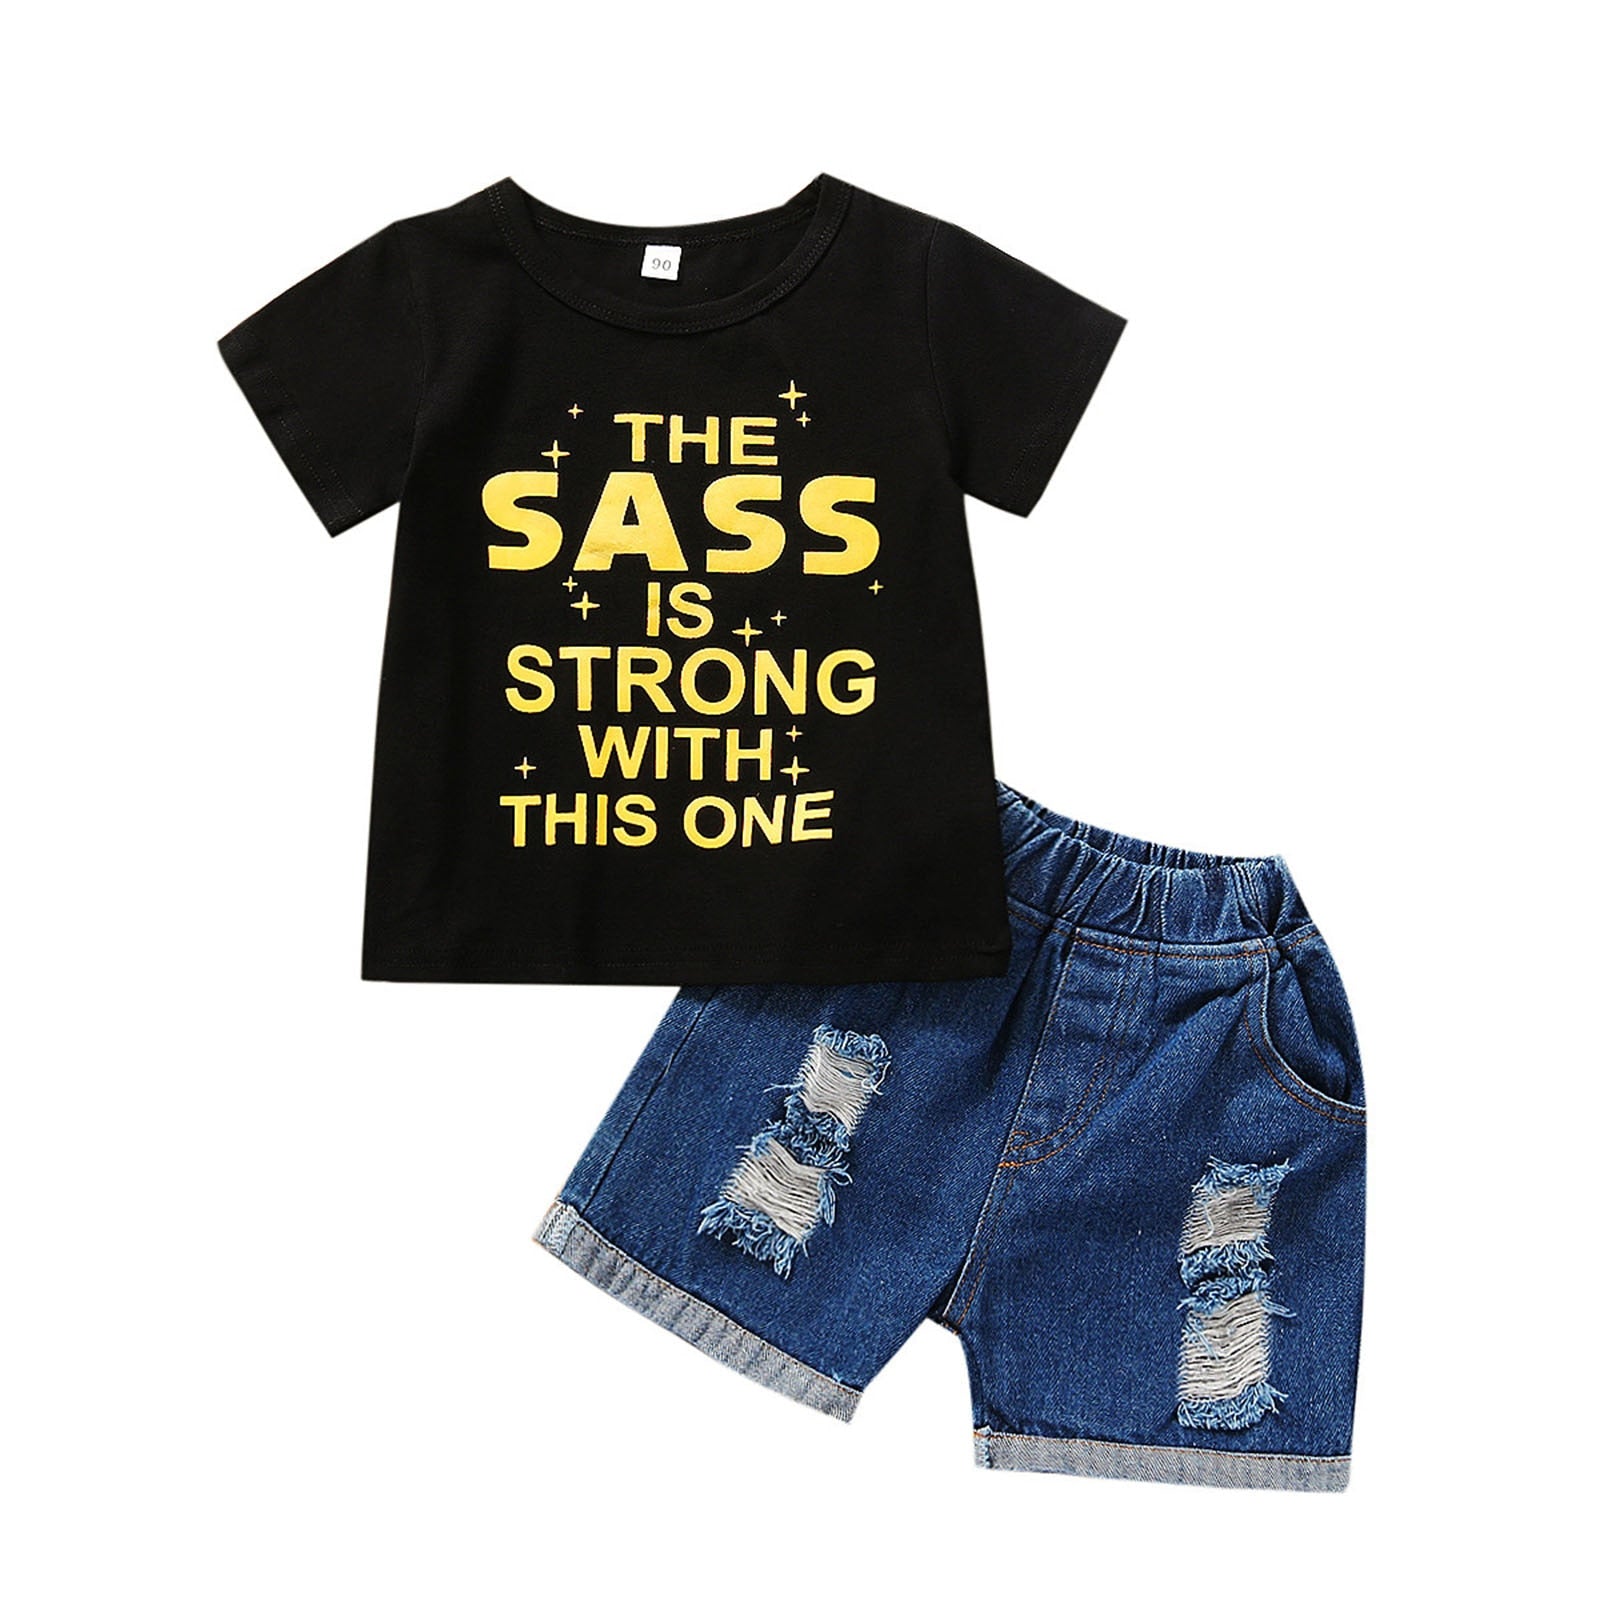 The SASS is Strong Tee Set